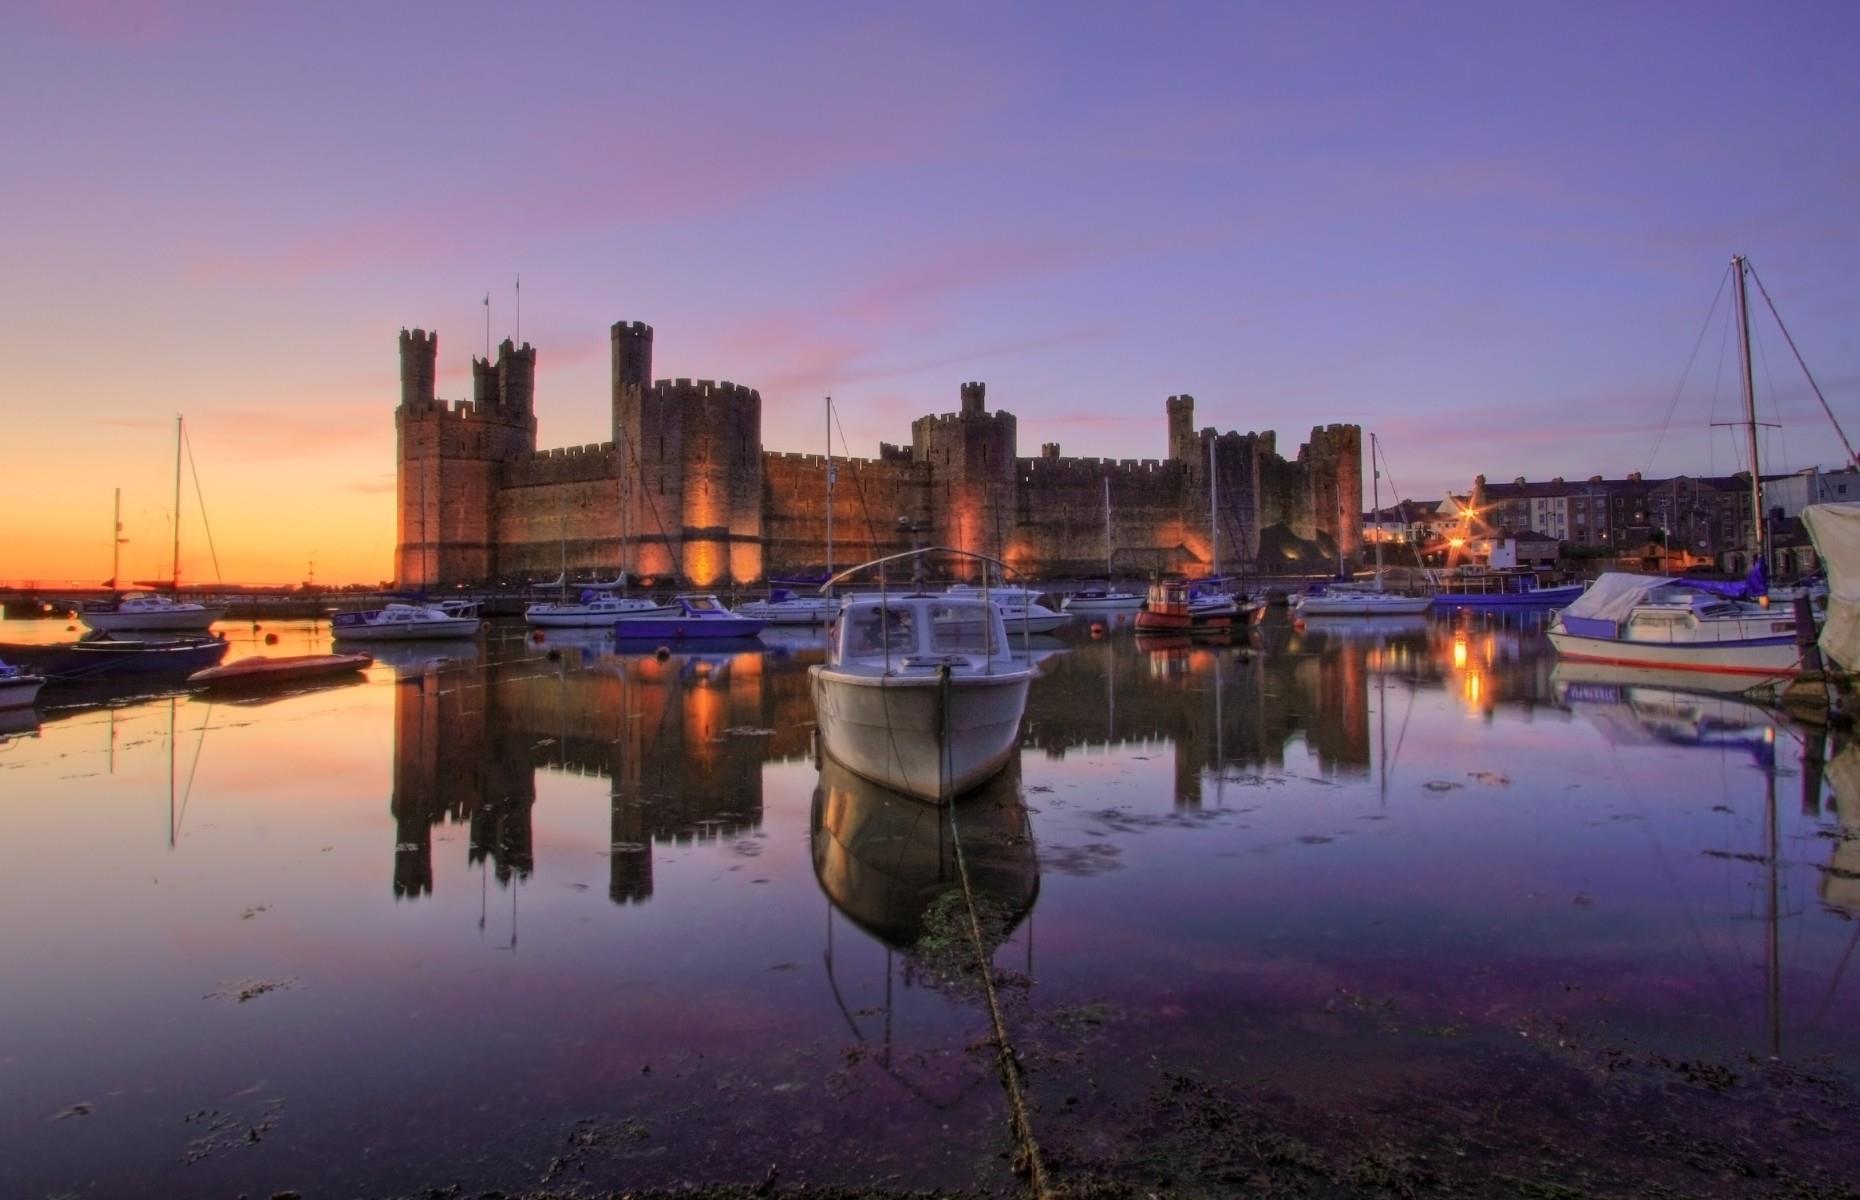 <p>Sitting on the banks of the River Seiont in Caernarfon, <a href="https://cadw.gov.wales/visit/places-to-visit/caernarfon-castle">this magnificent Welsh castle</a> is often regarded as one of the greatest buildings of the Middle Ages. The fortress-palace was built as part of King Edward I's defences to strengthen his power after conquering Wales. Caernarfon Castle is now a UNESCO World Heritage Site alongside the king’s other castles at Beaumaris, Conwy and Harlech.</p>